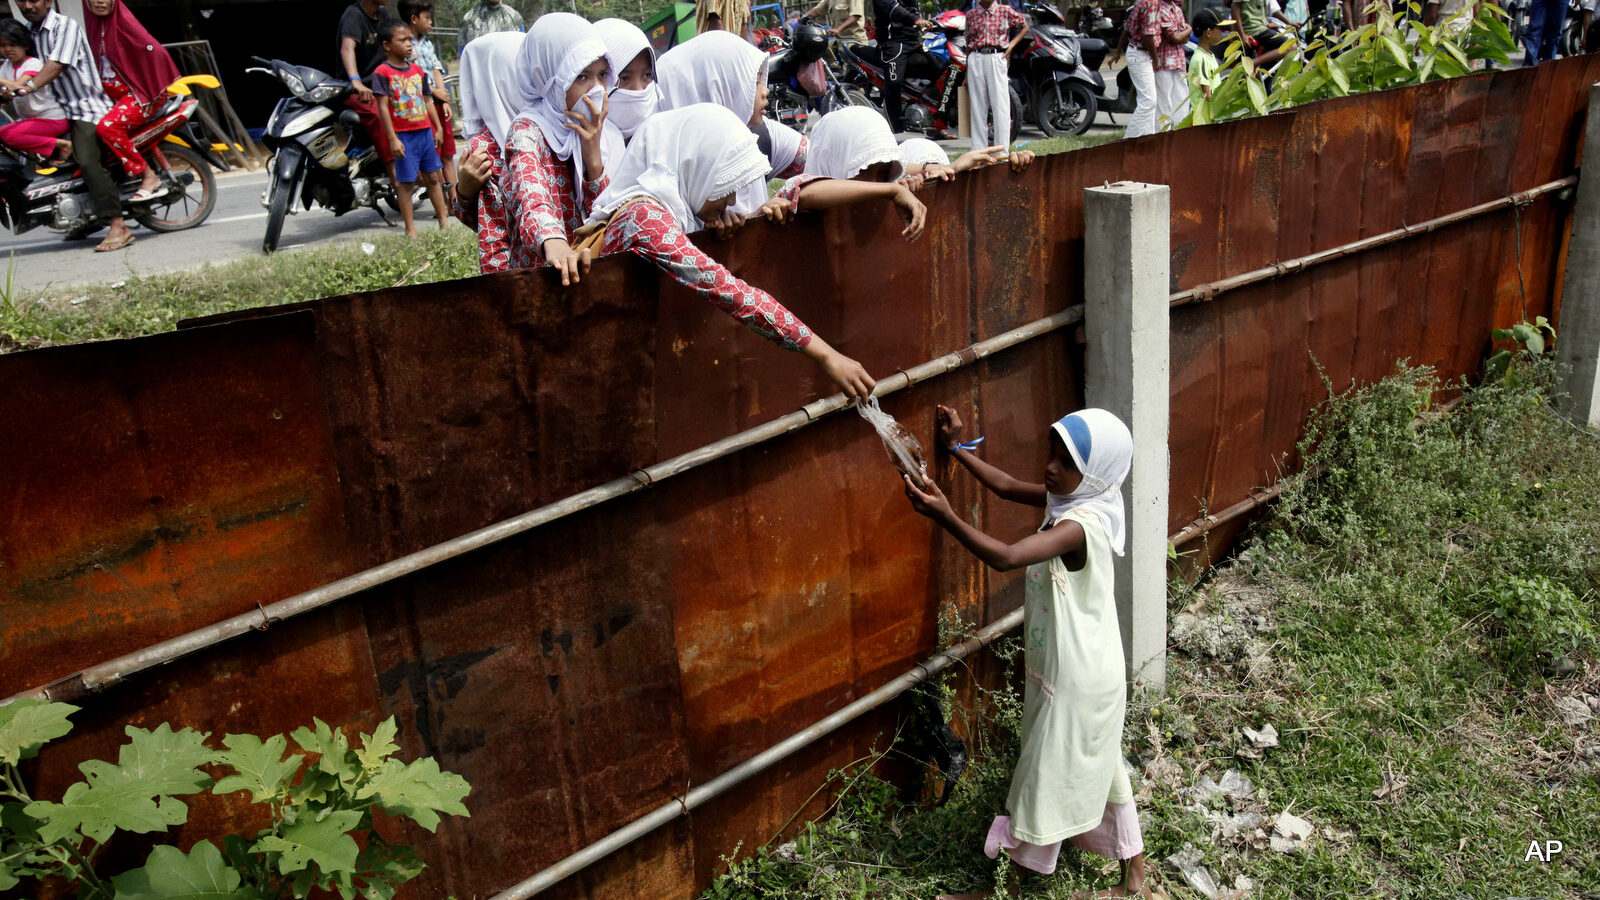 School children hand out food to a Rohingya young girl from outside the fence of a temporary shelter in Bayeun, Aceh province, Indonesia, Thursday, May 21, 2015. In the past three weeks, thousands of people — Rohingya Muslims fleeing persecution in Myanmar and Bangladeshis trying to escape poverty — have landed in overcrowded boats on the shores of Indonesia, Malaysia and Thailand. After initially pushing many boats back, Malaysia and Indonesia announced on Wednesday that they will offer temporary shelter to all incoming migrants.